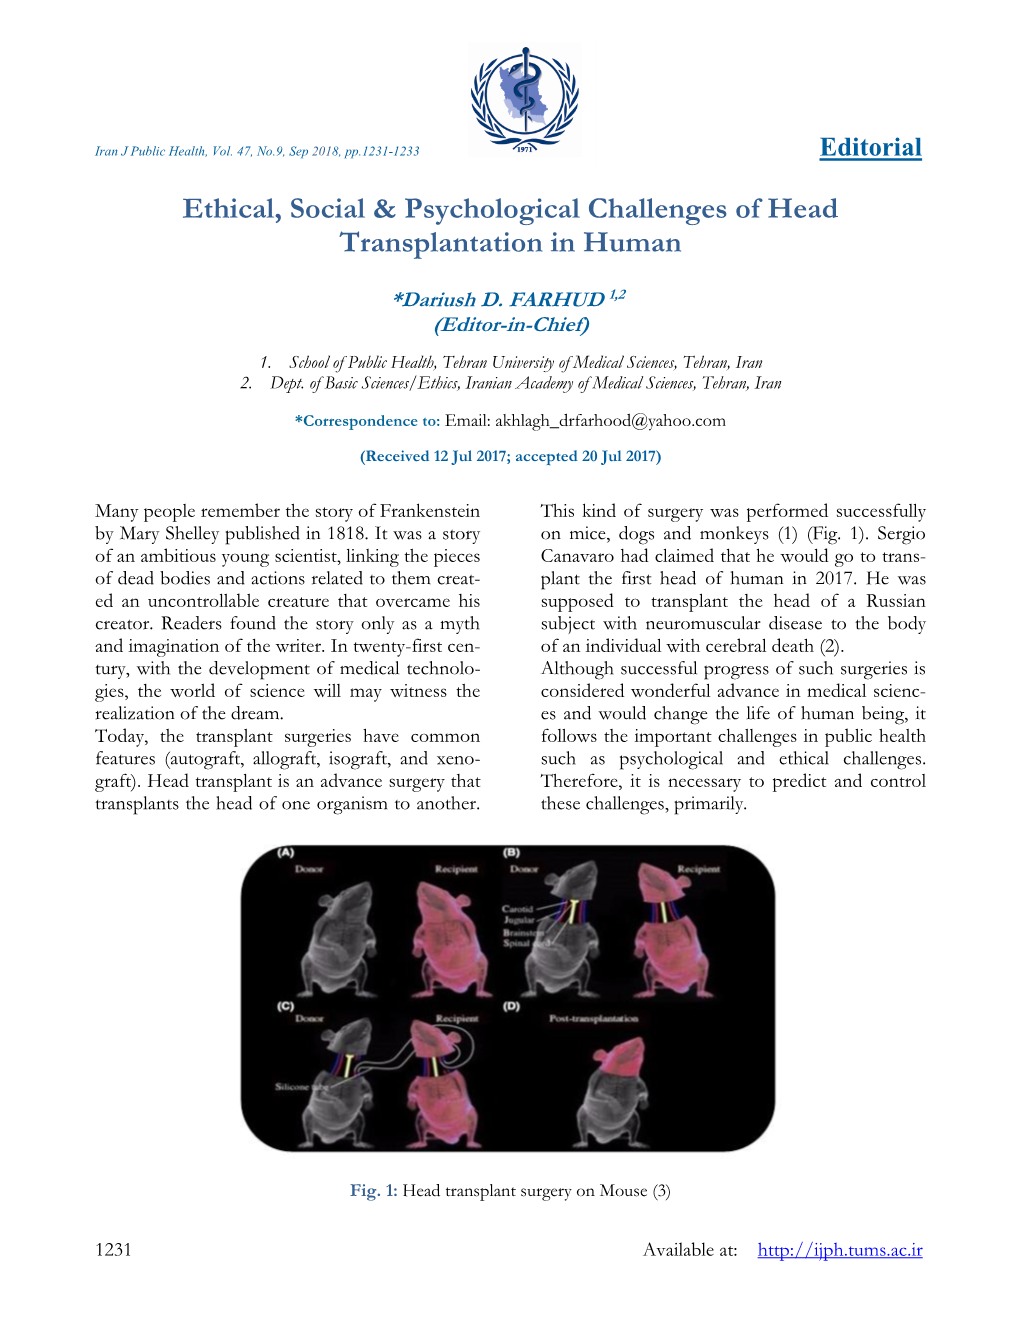 Ethical, Social & Psychological Challenges of Head